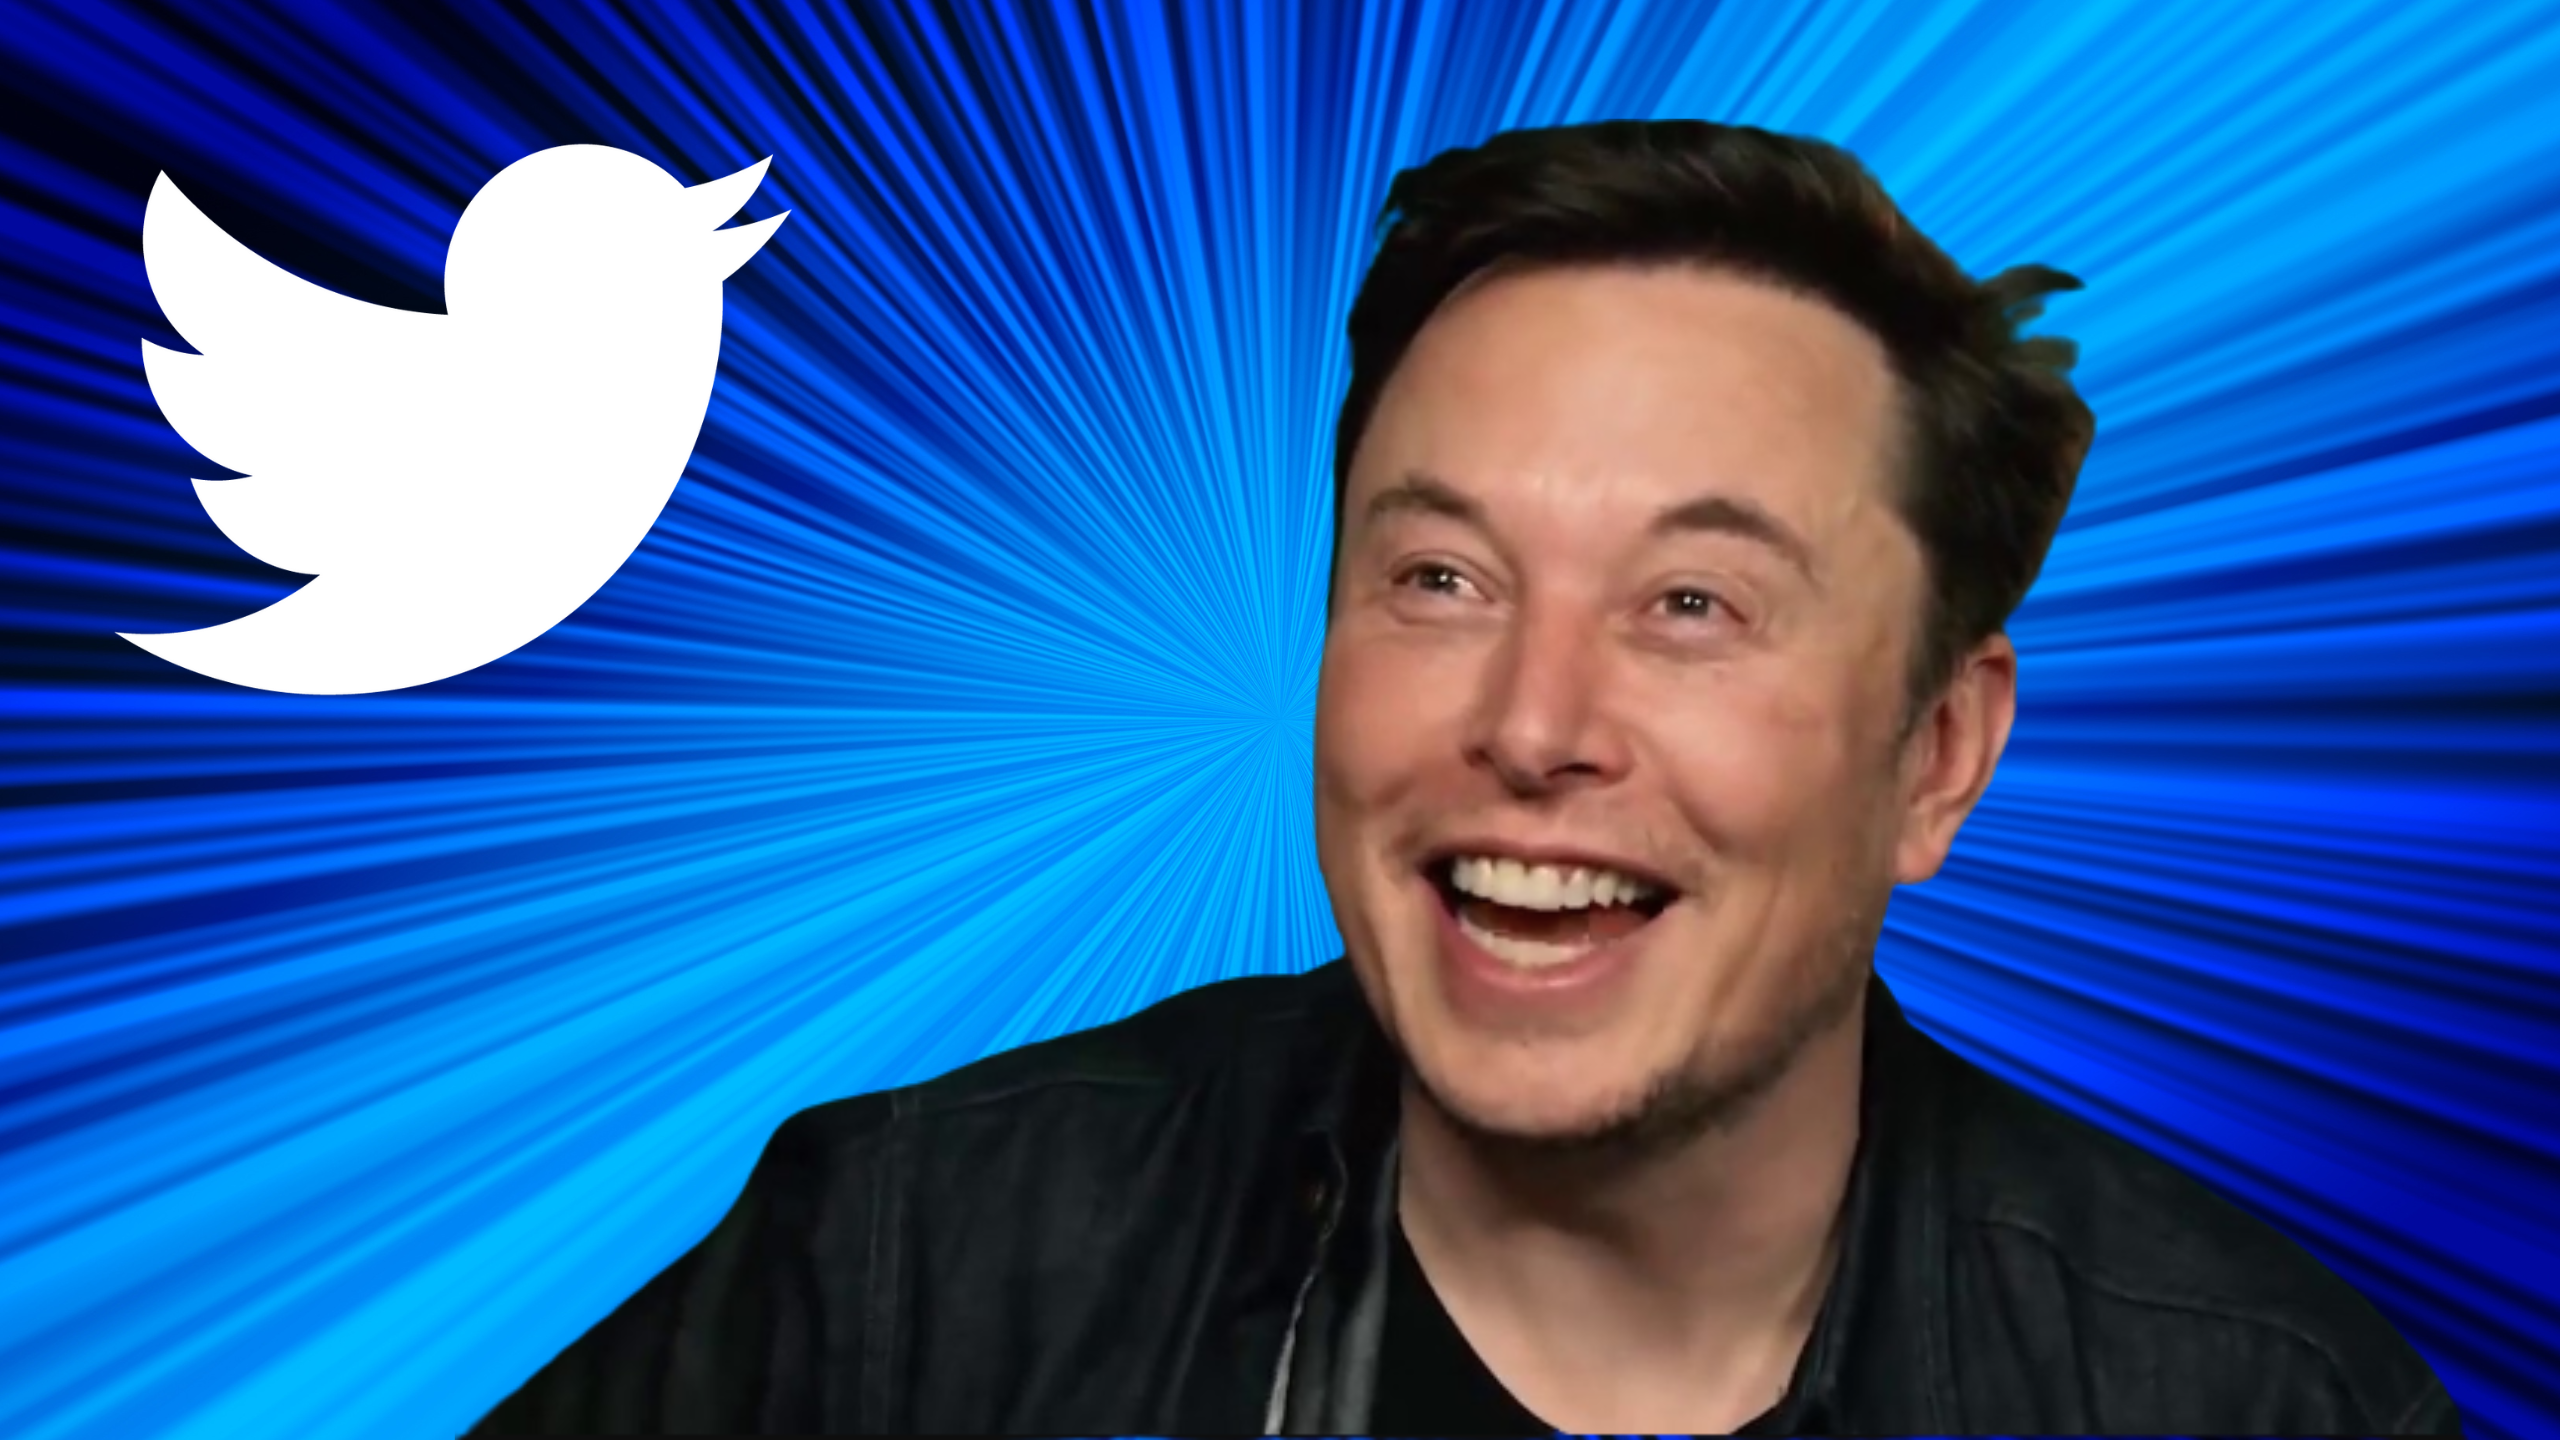 The end of the Elon Musk-Twitter deal is nigh. What's in store for Twitter's future?